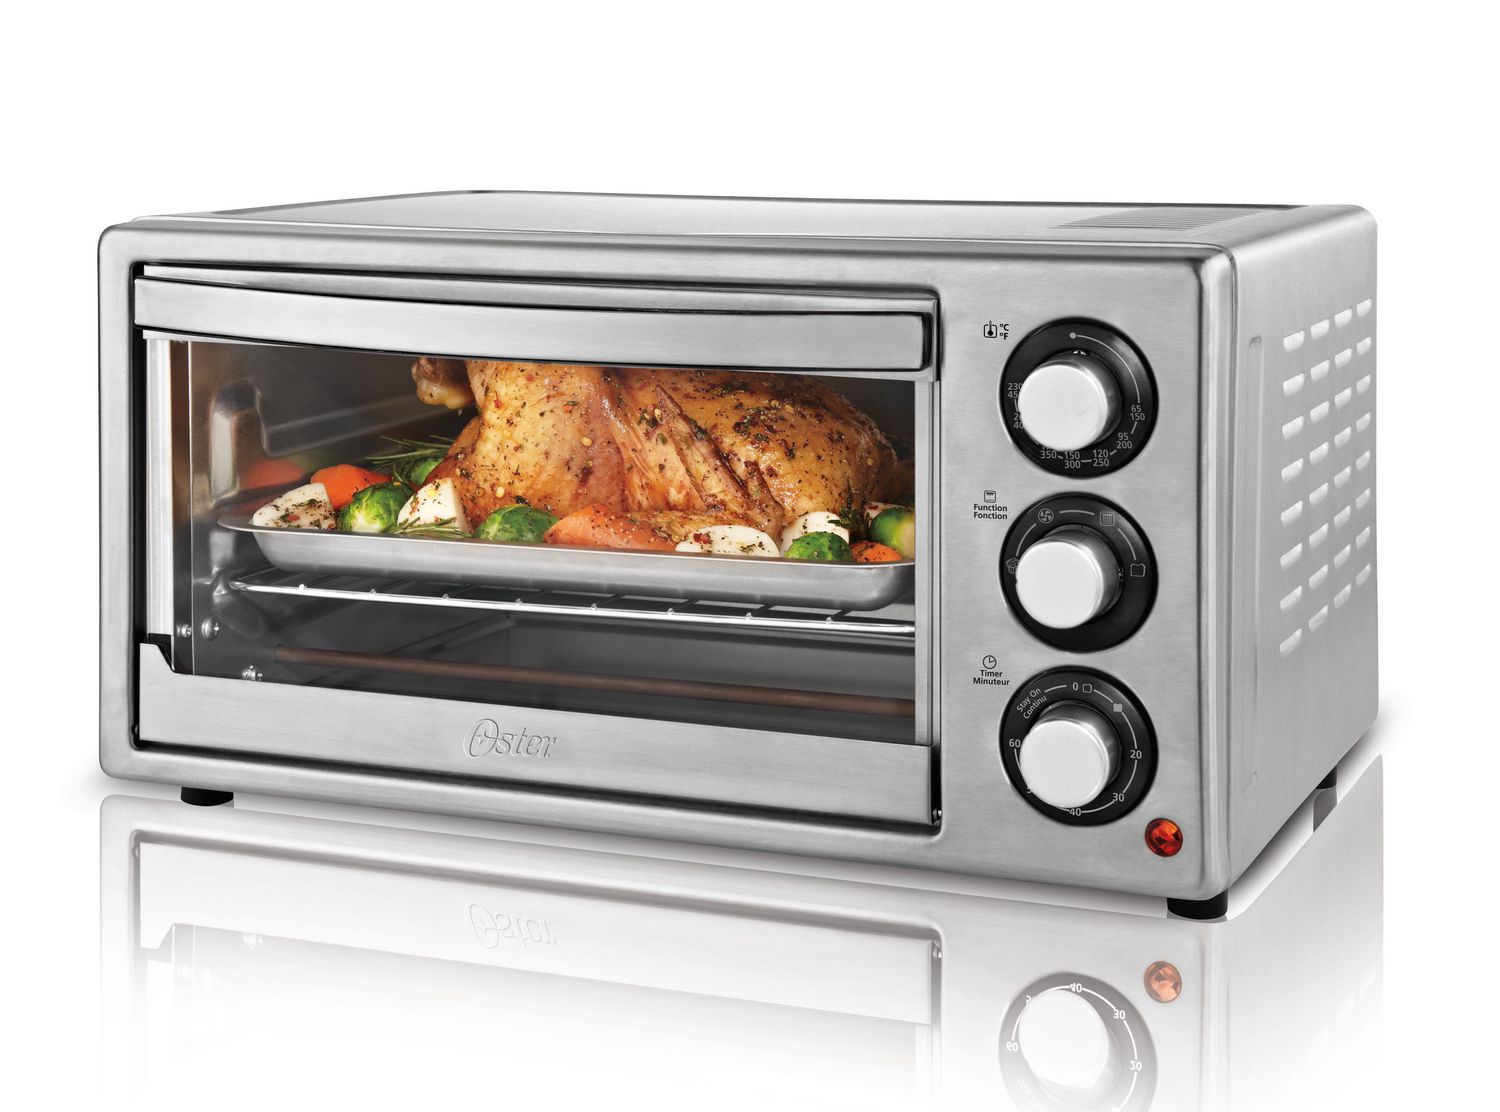 Oster 6 Slice Convection Toaster Oven Walmart Canada